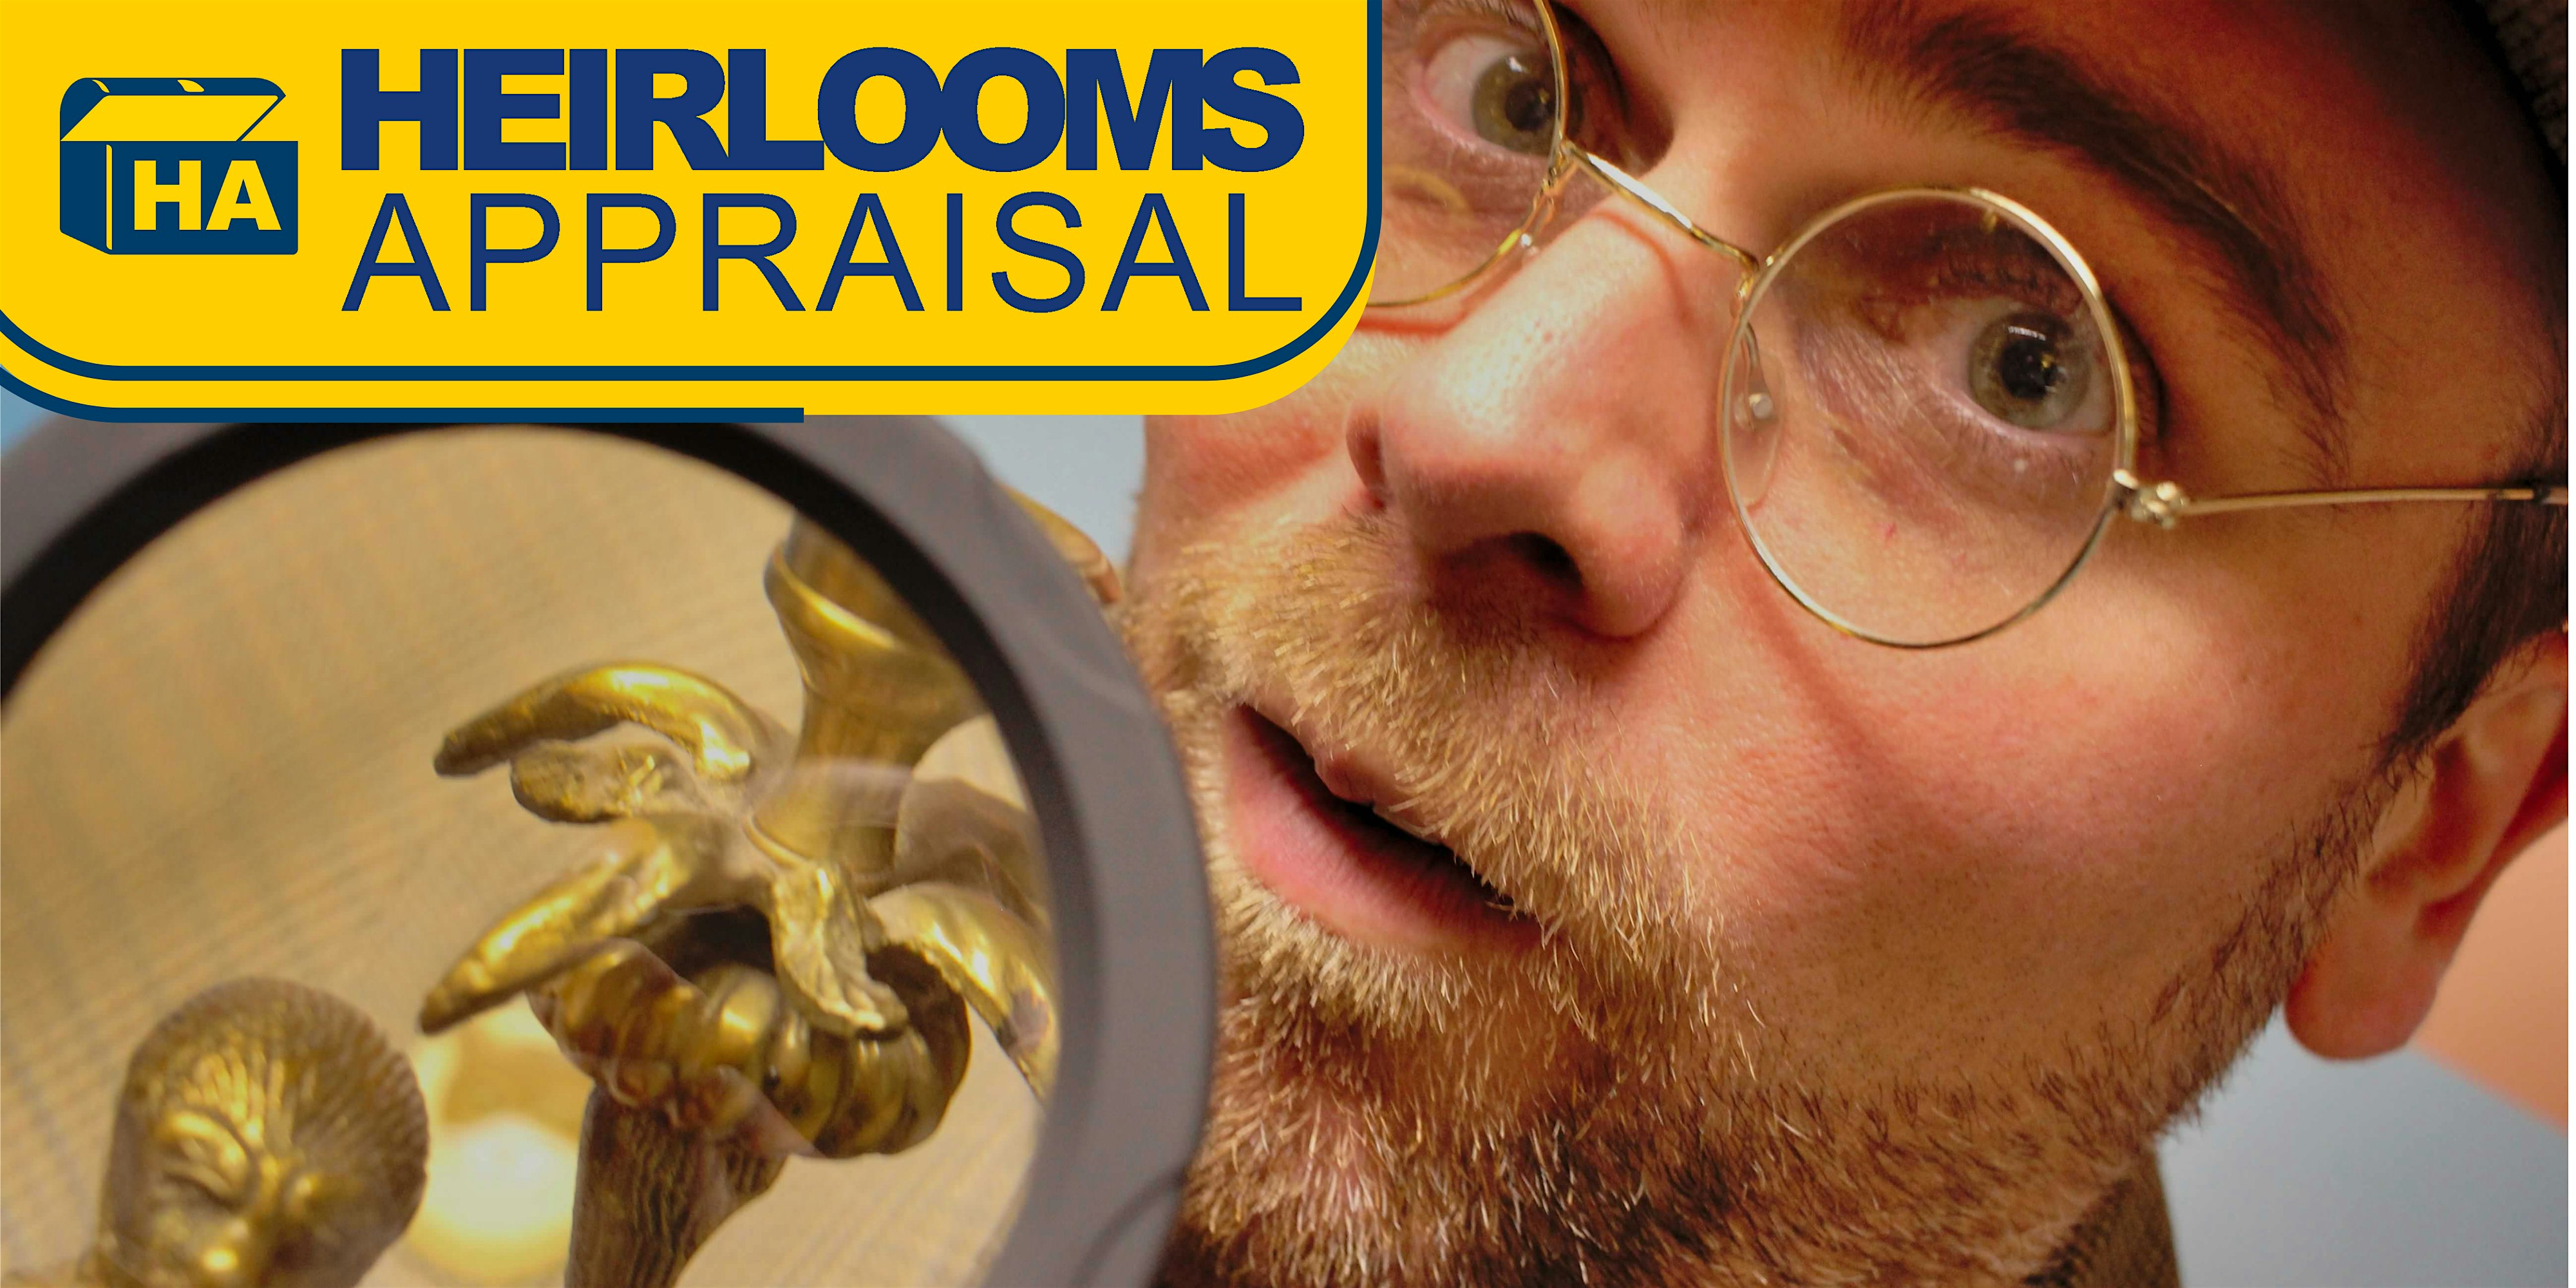 Heirlooms Appraisal - An Improvised Comedy Show About YOUR Antiques